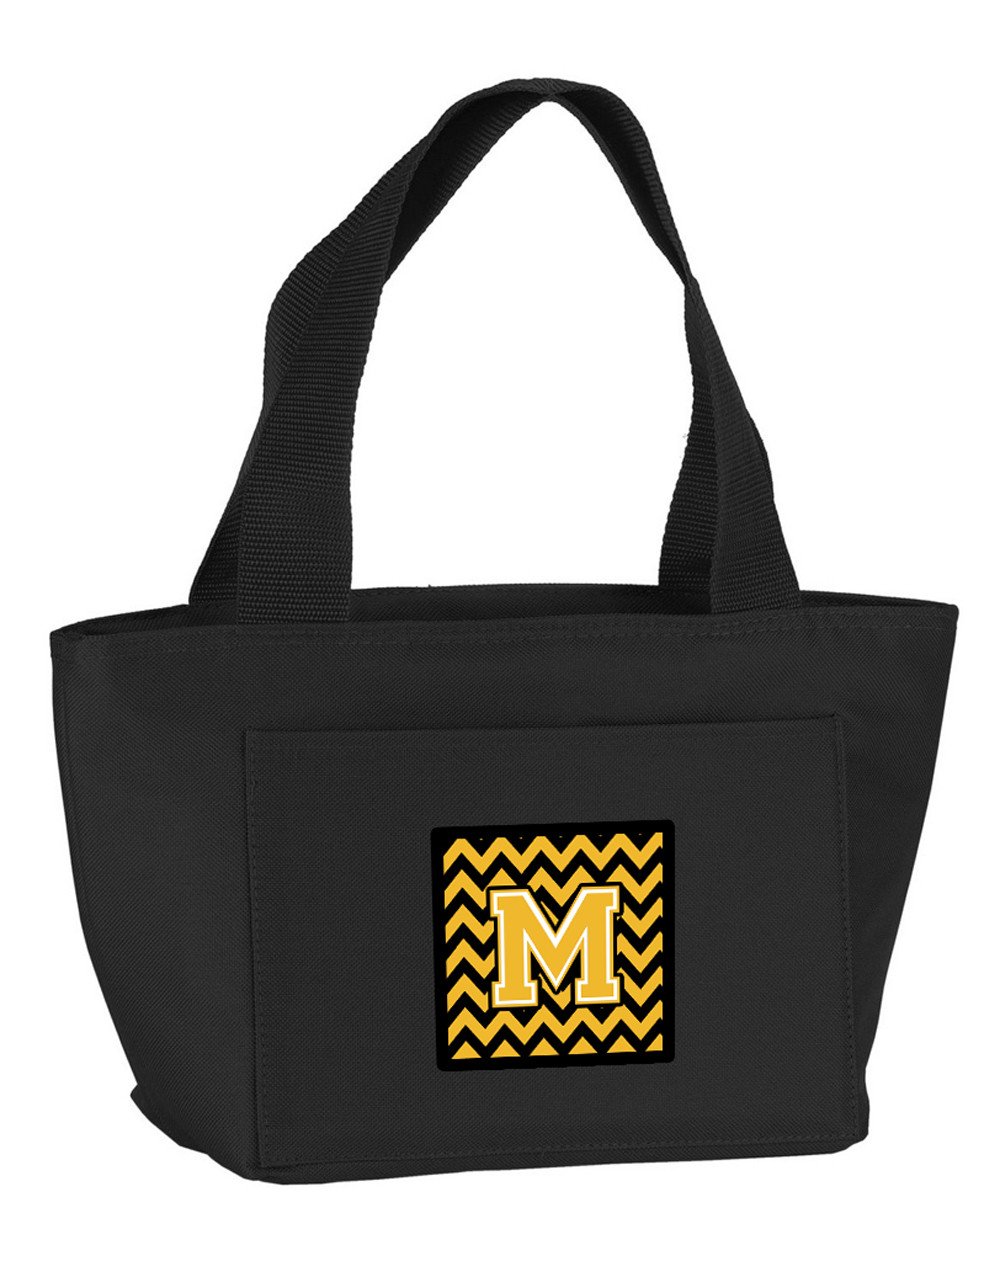 Letter M Chevron Black and Gold Lunch Bag CJ1053-MBK-8808 by Caroline's Treasures